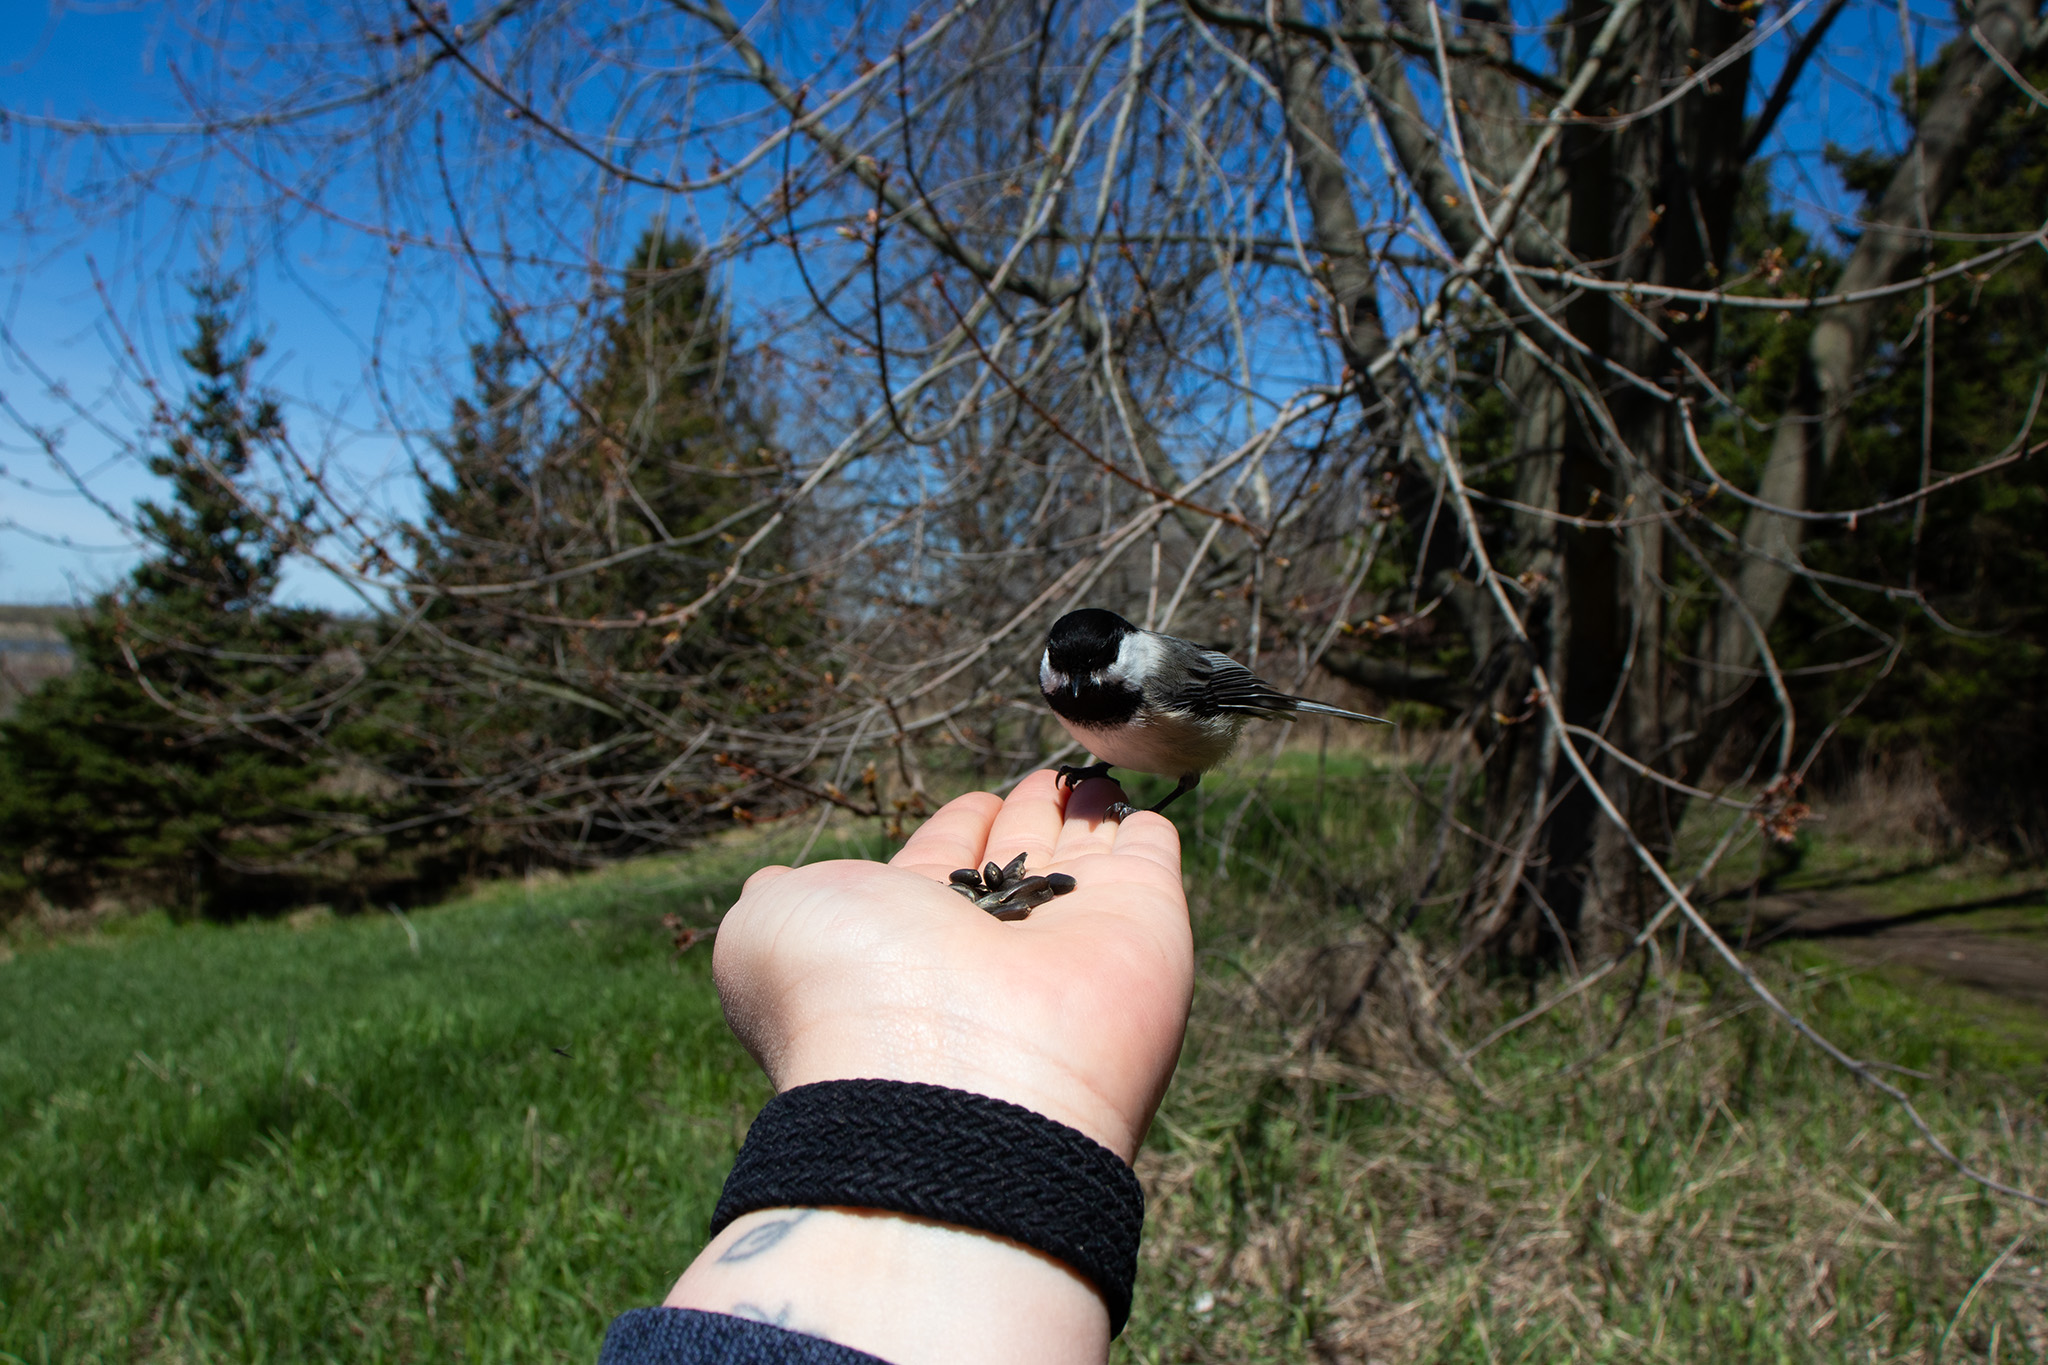 Image of a person's hand open with birdseed in it and a chickadee eating from it